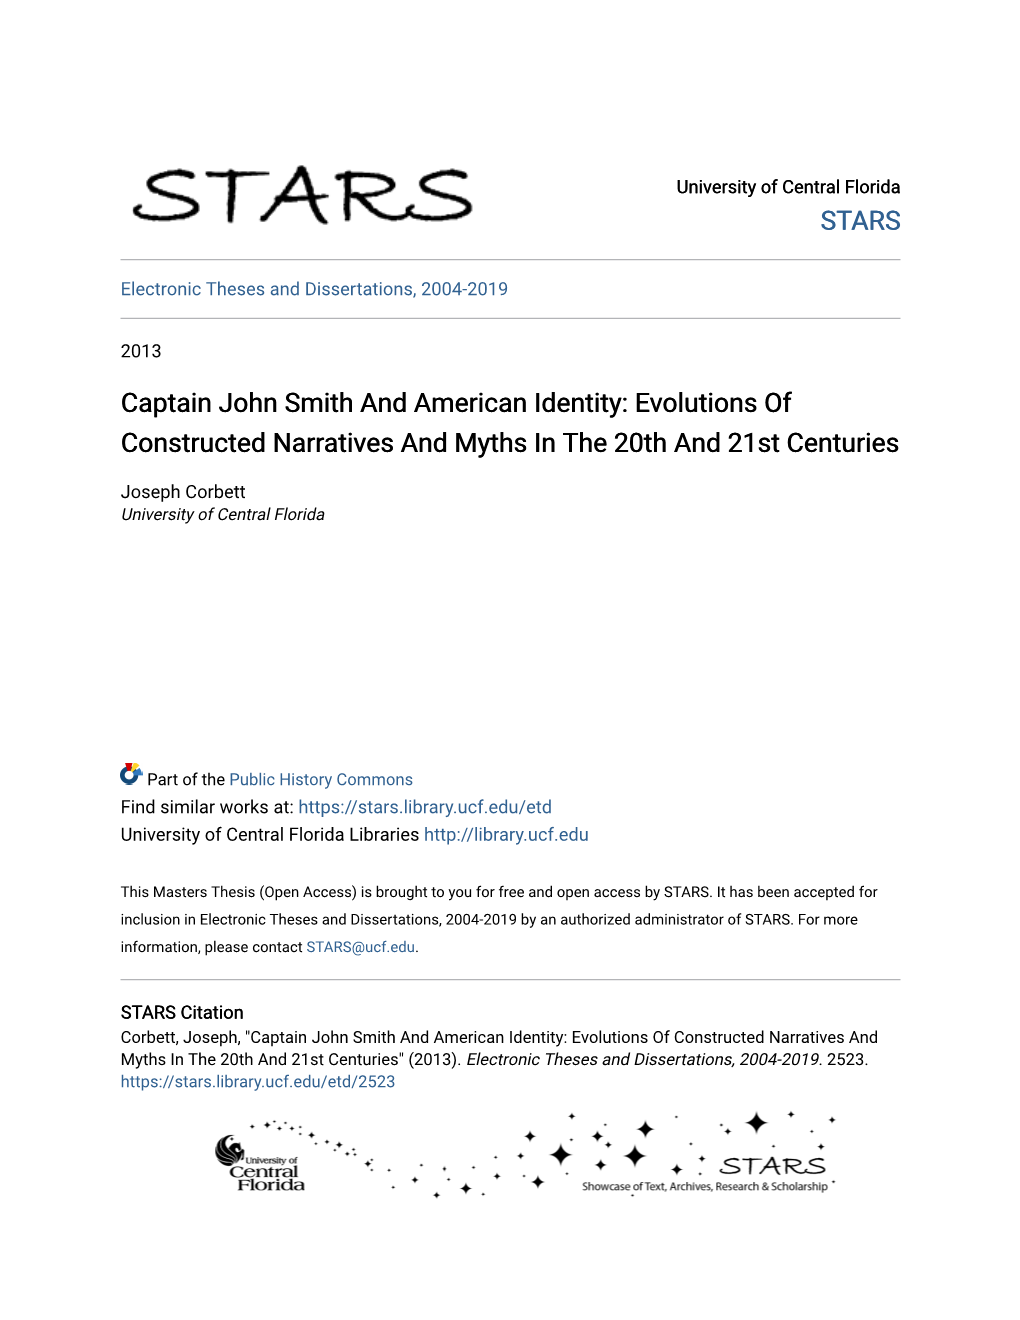 Captain John Smith and American Identity: Evolutions of Constructed Narratives and Myths in the 20Th and 21St Centuries